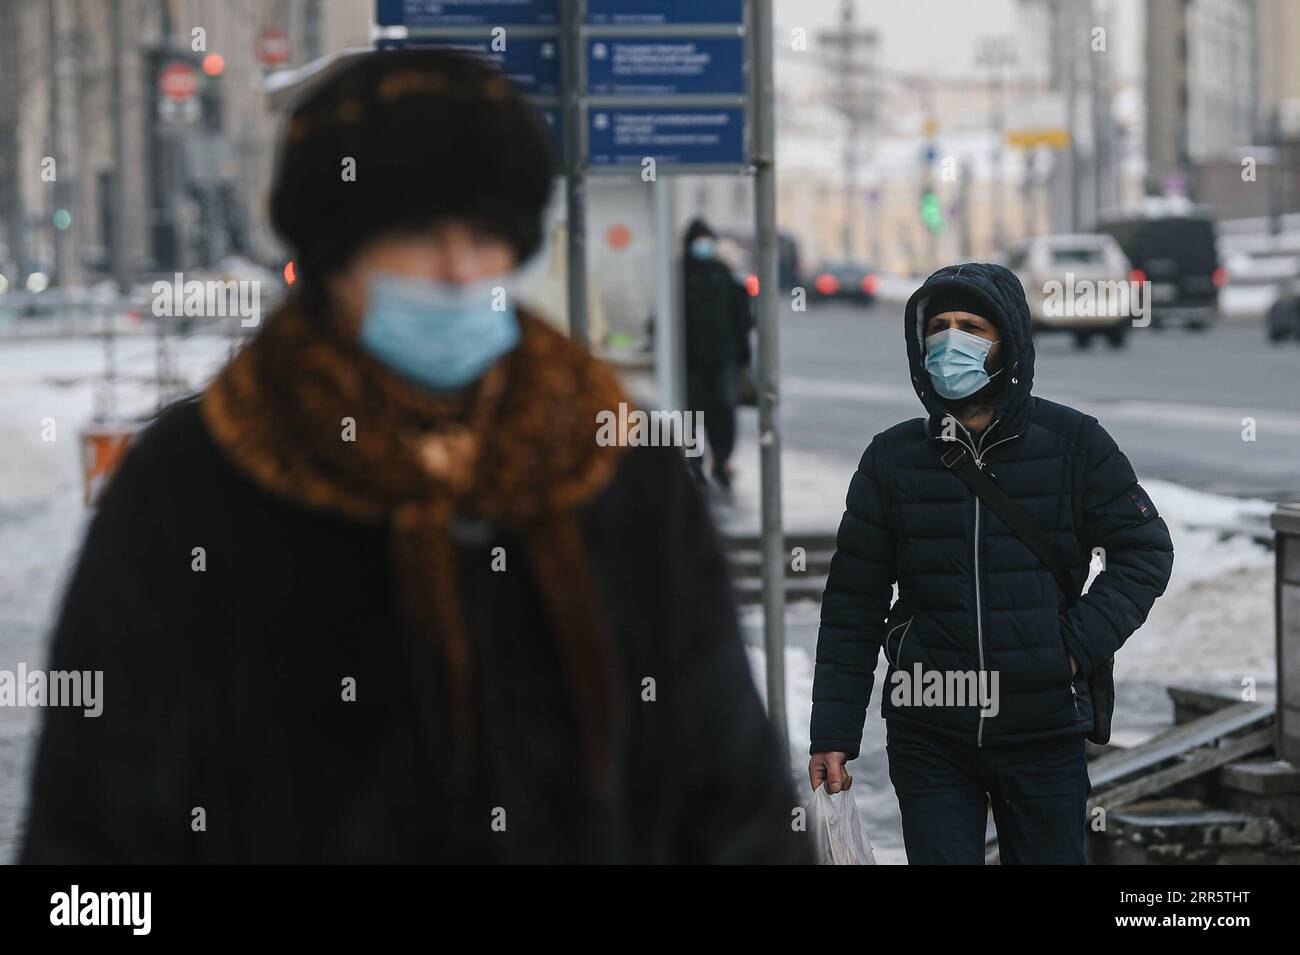 210115 -- MOSCOW, Jan. 15, 2021 -- Pedestrians wearing face masks walk on a street in Moscow, Russia, on Jan. 15, 2021. Russia recorded 24,715 more COVID-19 cases over the past 24 hours, roughly the same as in the previous day, the country s COVID-19 response center said Friday. The national tally has thus increased to 3,520,531 with 64,495 deaths and 2,909,680 recoveries, the center said.  RUSSIA-MOSCOW-COVID-19-CASES EvgenyxSinitsyn PUBLICATIONxNOTxINxCHN Stock Photo